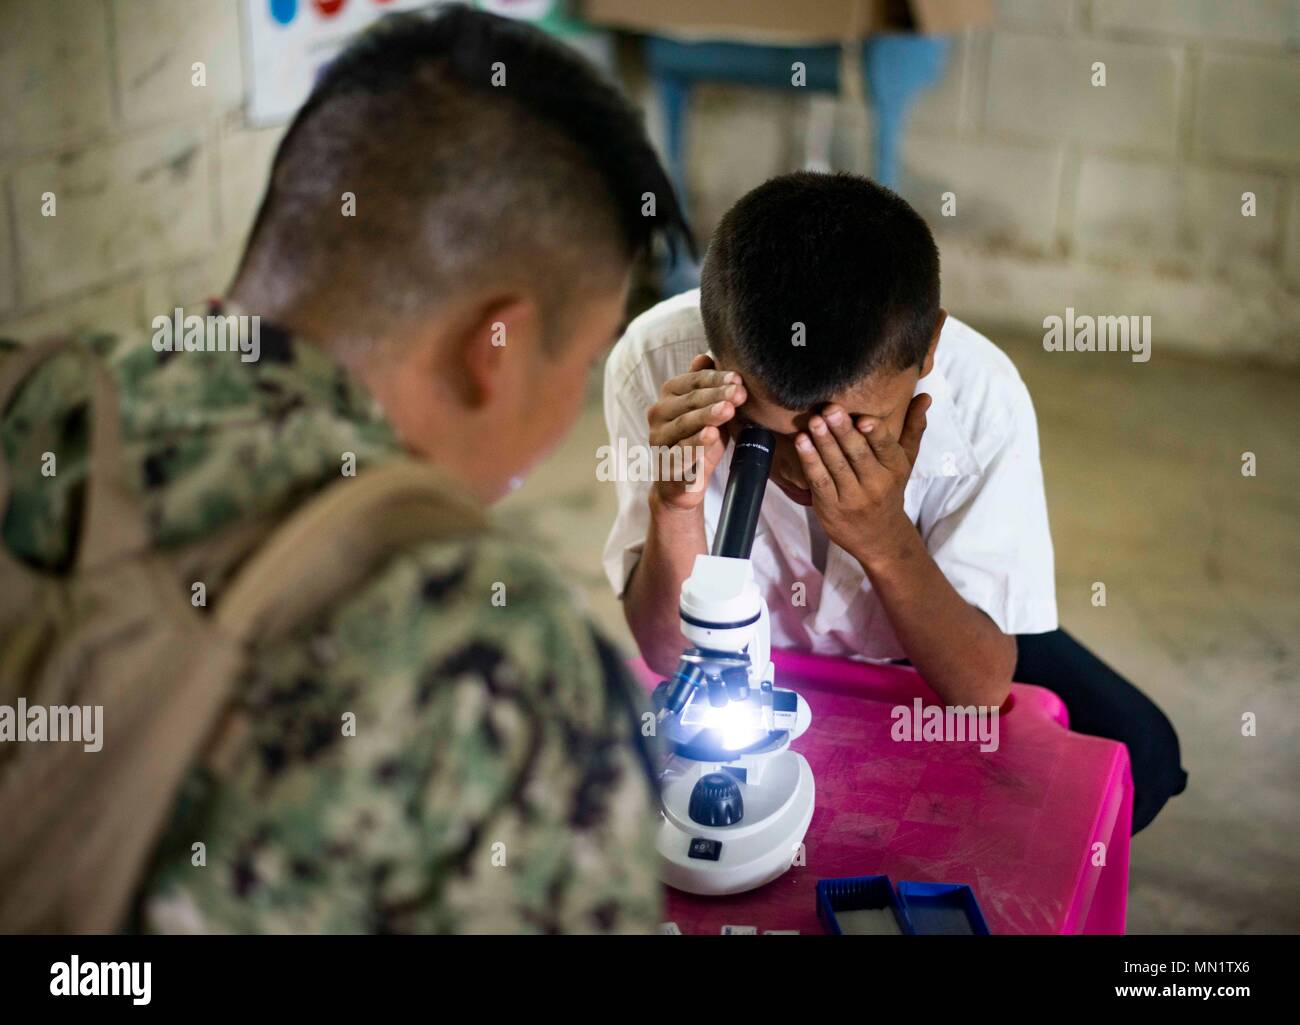 170810-N-KW679-0083 Tarros, Honduras (August 10, 2017) Hospital Corpsman 2nd Class Yang Yang, assigned to Navy Environmental Preventive Medicine Unit 5, helps a Honduran student look through a microscope, during a Southern Partnership Station 17 community relations project (COMREL) at Escuela Rural Mixta Luz y Esperanza, a local elementary school SPS 17 is a U.S. Navy deployment, executed by U.S. Naval Forces Southern Command/U.S. 4th Fleet, focused on subject matter expert exchanges with partner nation militaries and security forces in Central and South America. (U.S. Navy photo by Mass Commu Stock Photo